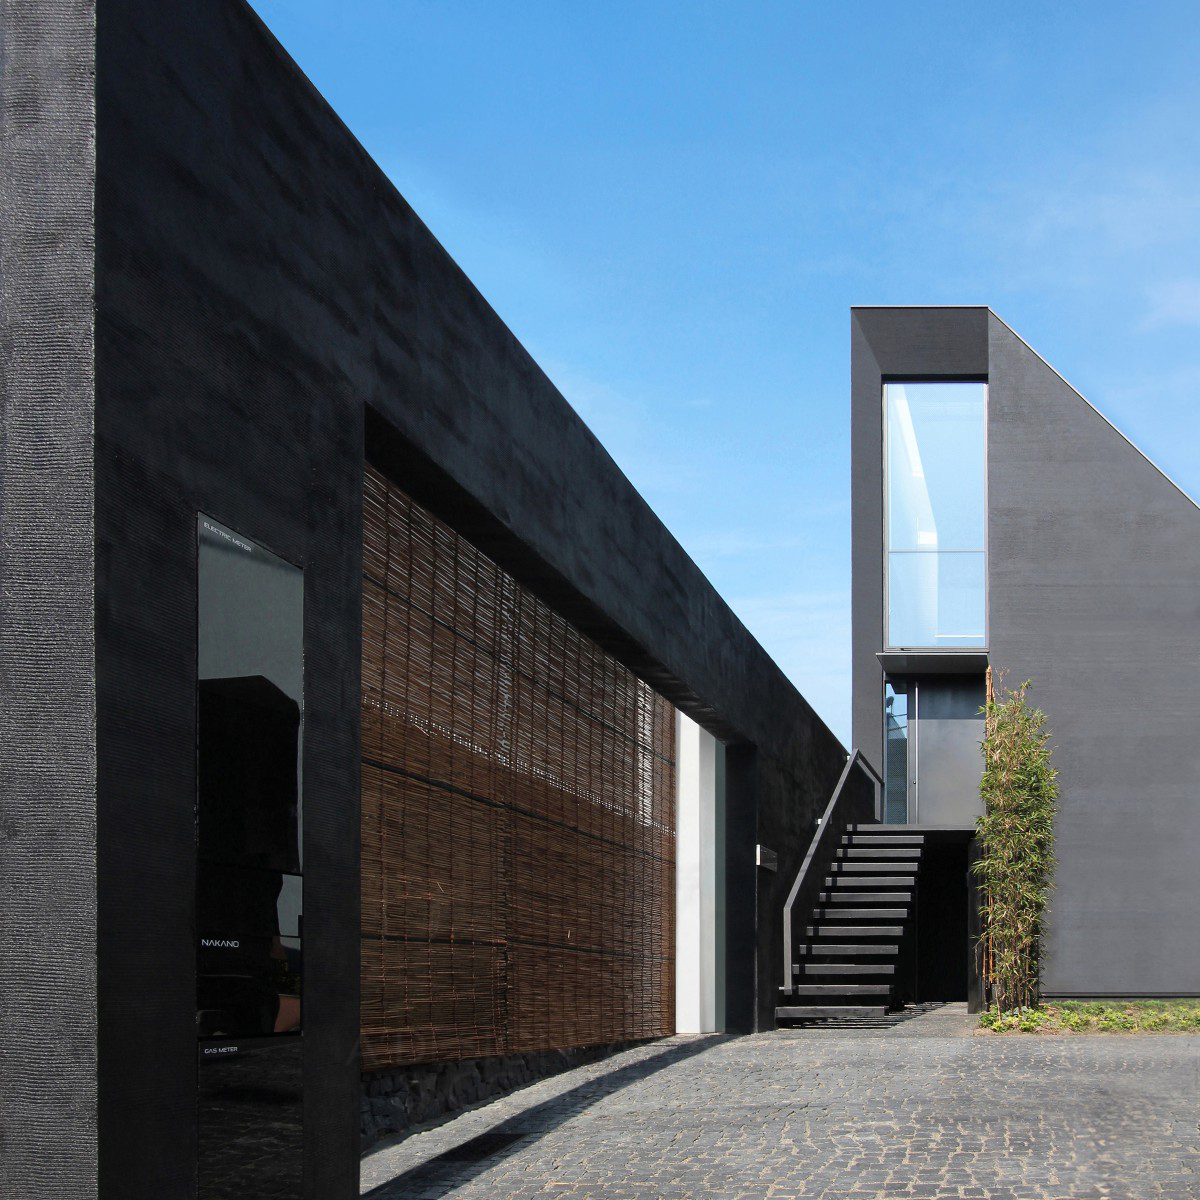 Nobuaki Miyashita wins Silver at the prestigious A' Architecture, Building and Structure Design Award with Black Monolithic Wall Residential House.